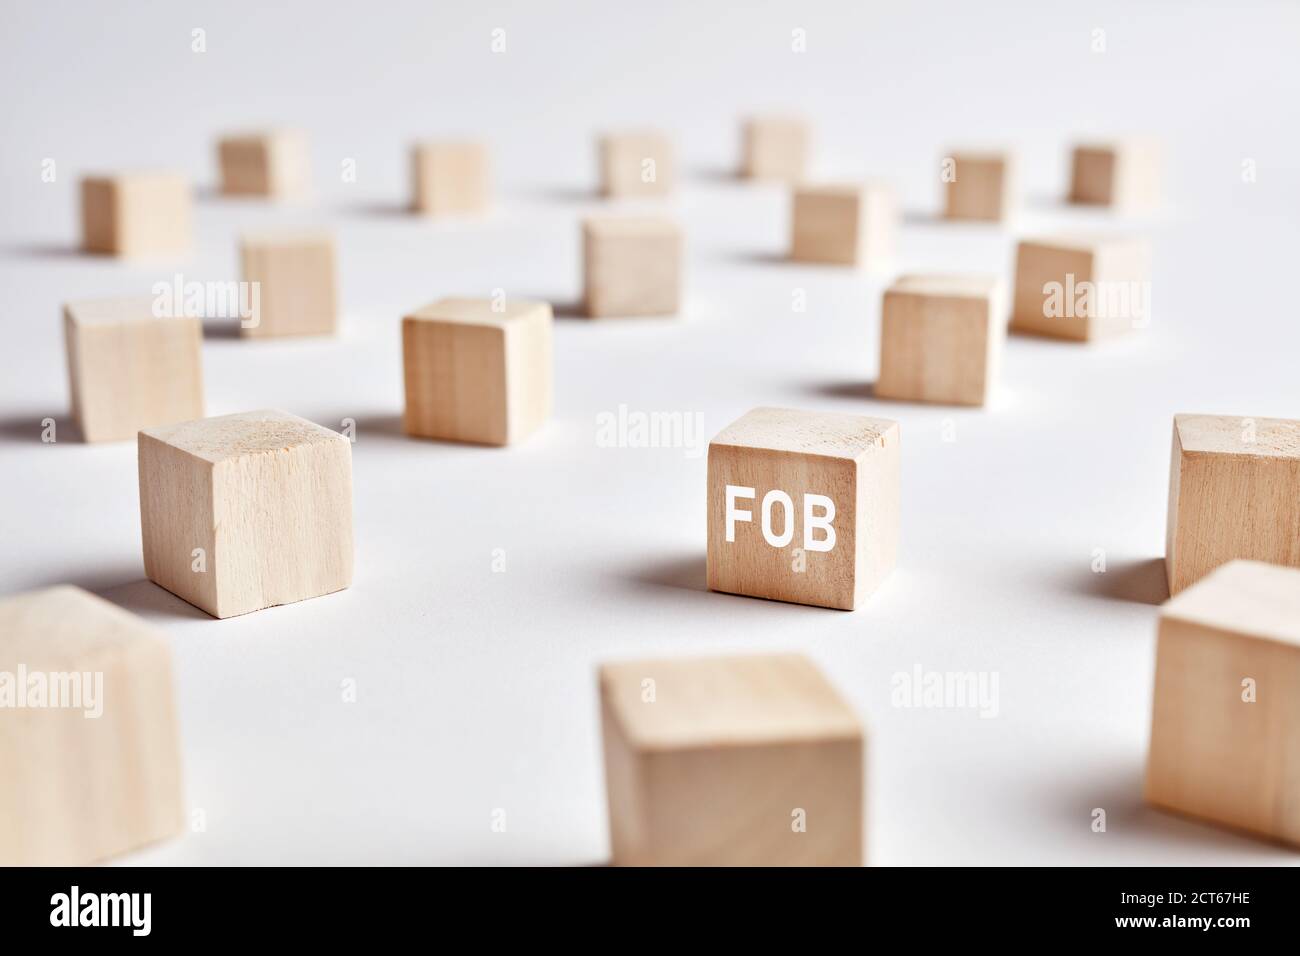 The word FOB (free on board) on wooden cubes. Logistic distribution, warehouse or delivery industry or business concept. Stock Photo